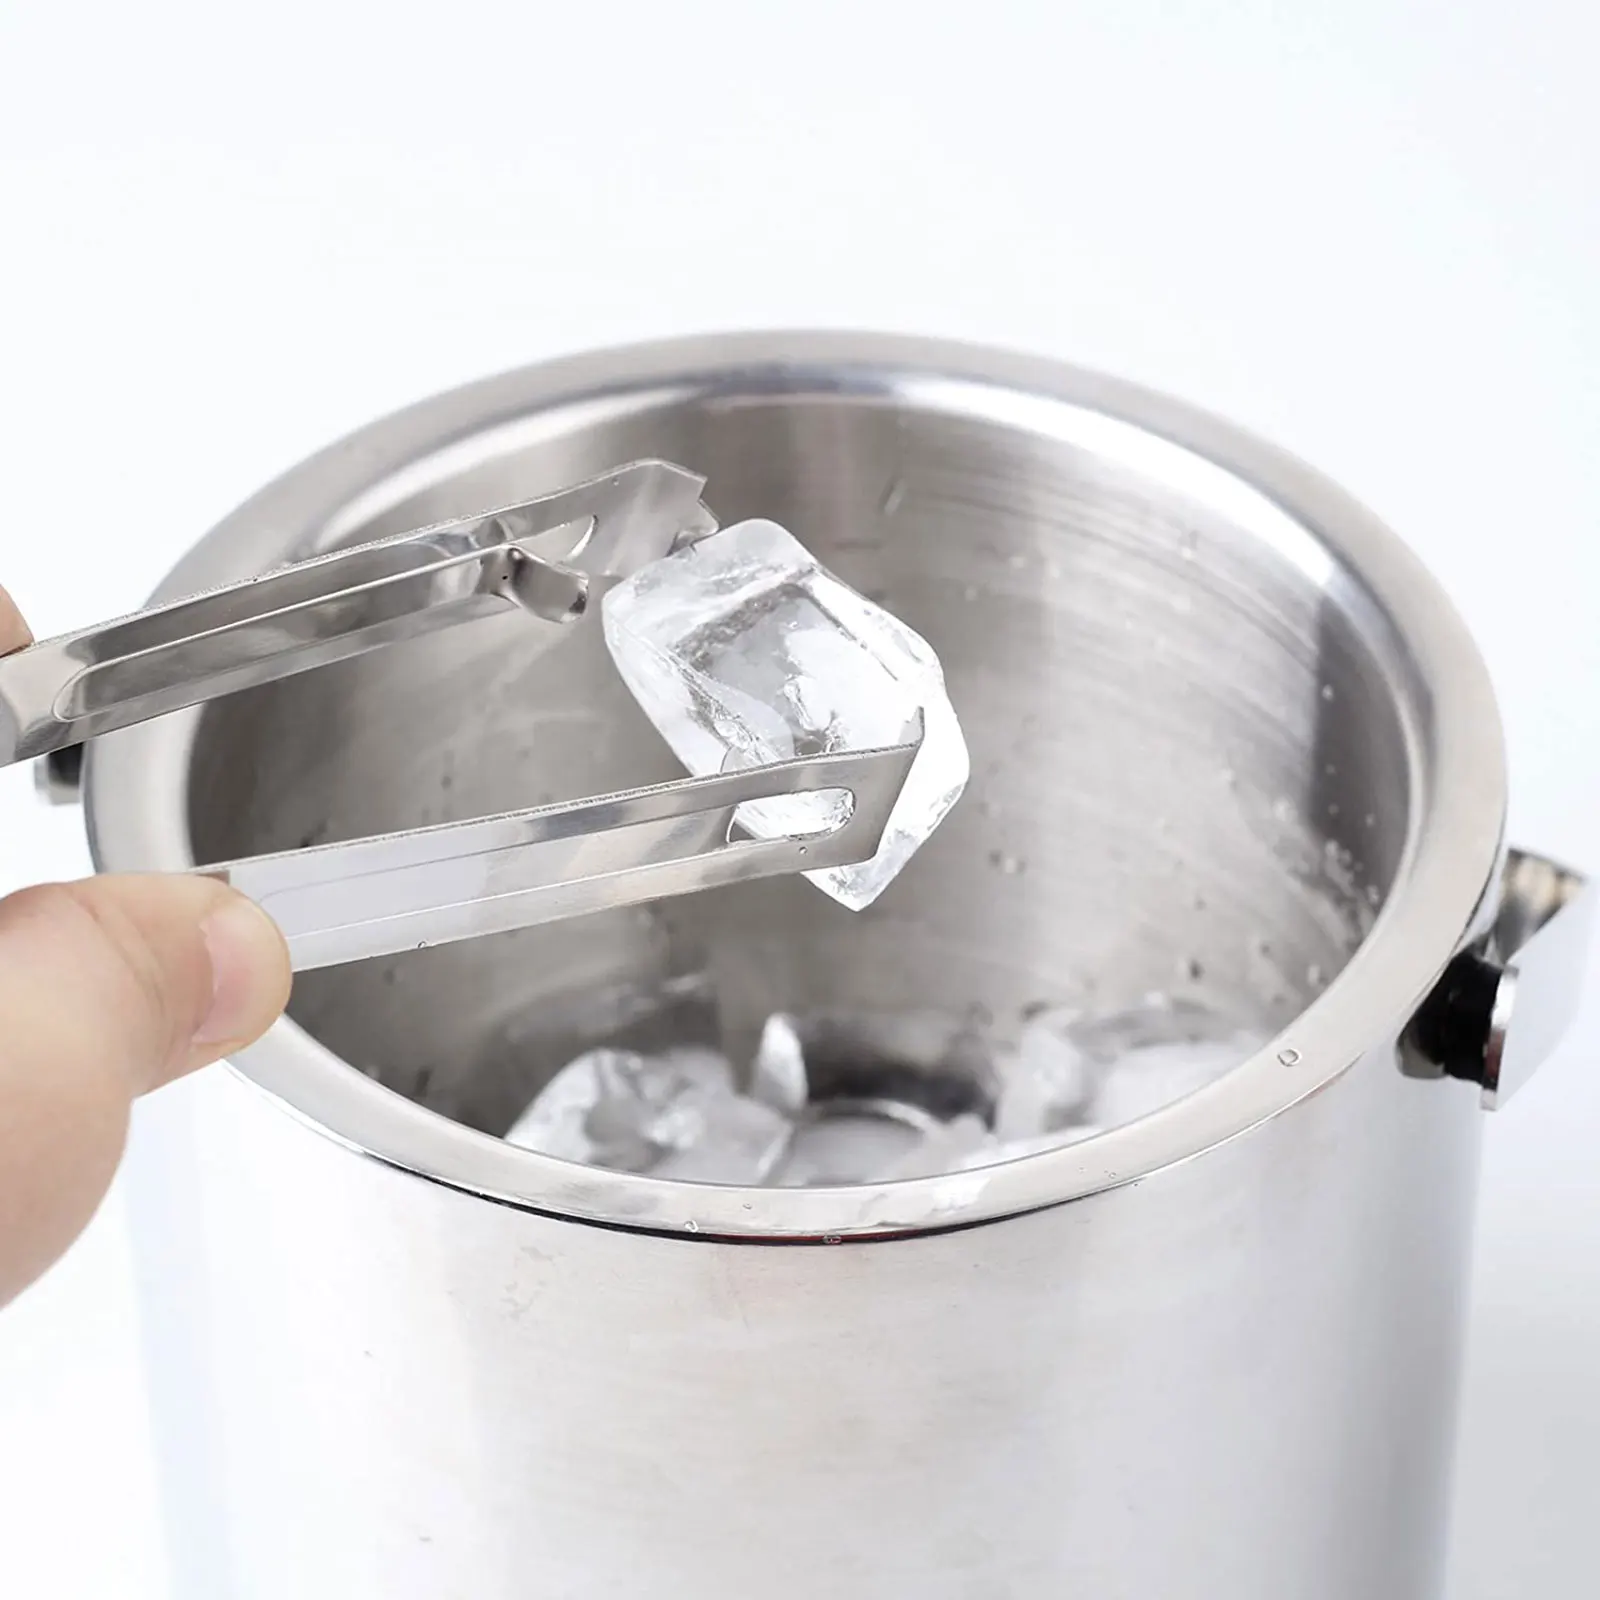 https://ae01.alicdn.com/kf/Hb957e92cb409461690c45648532ffbb4D/Double-Wall-Ice-Bucket-1-3L-3-2L-Stainless-steel-Ice-Cube-Container-with-ice-tong.jpg